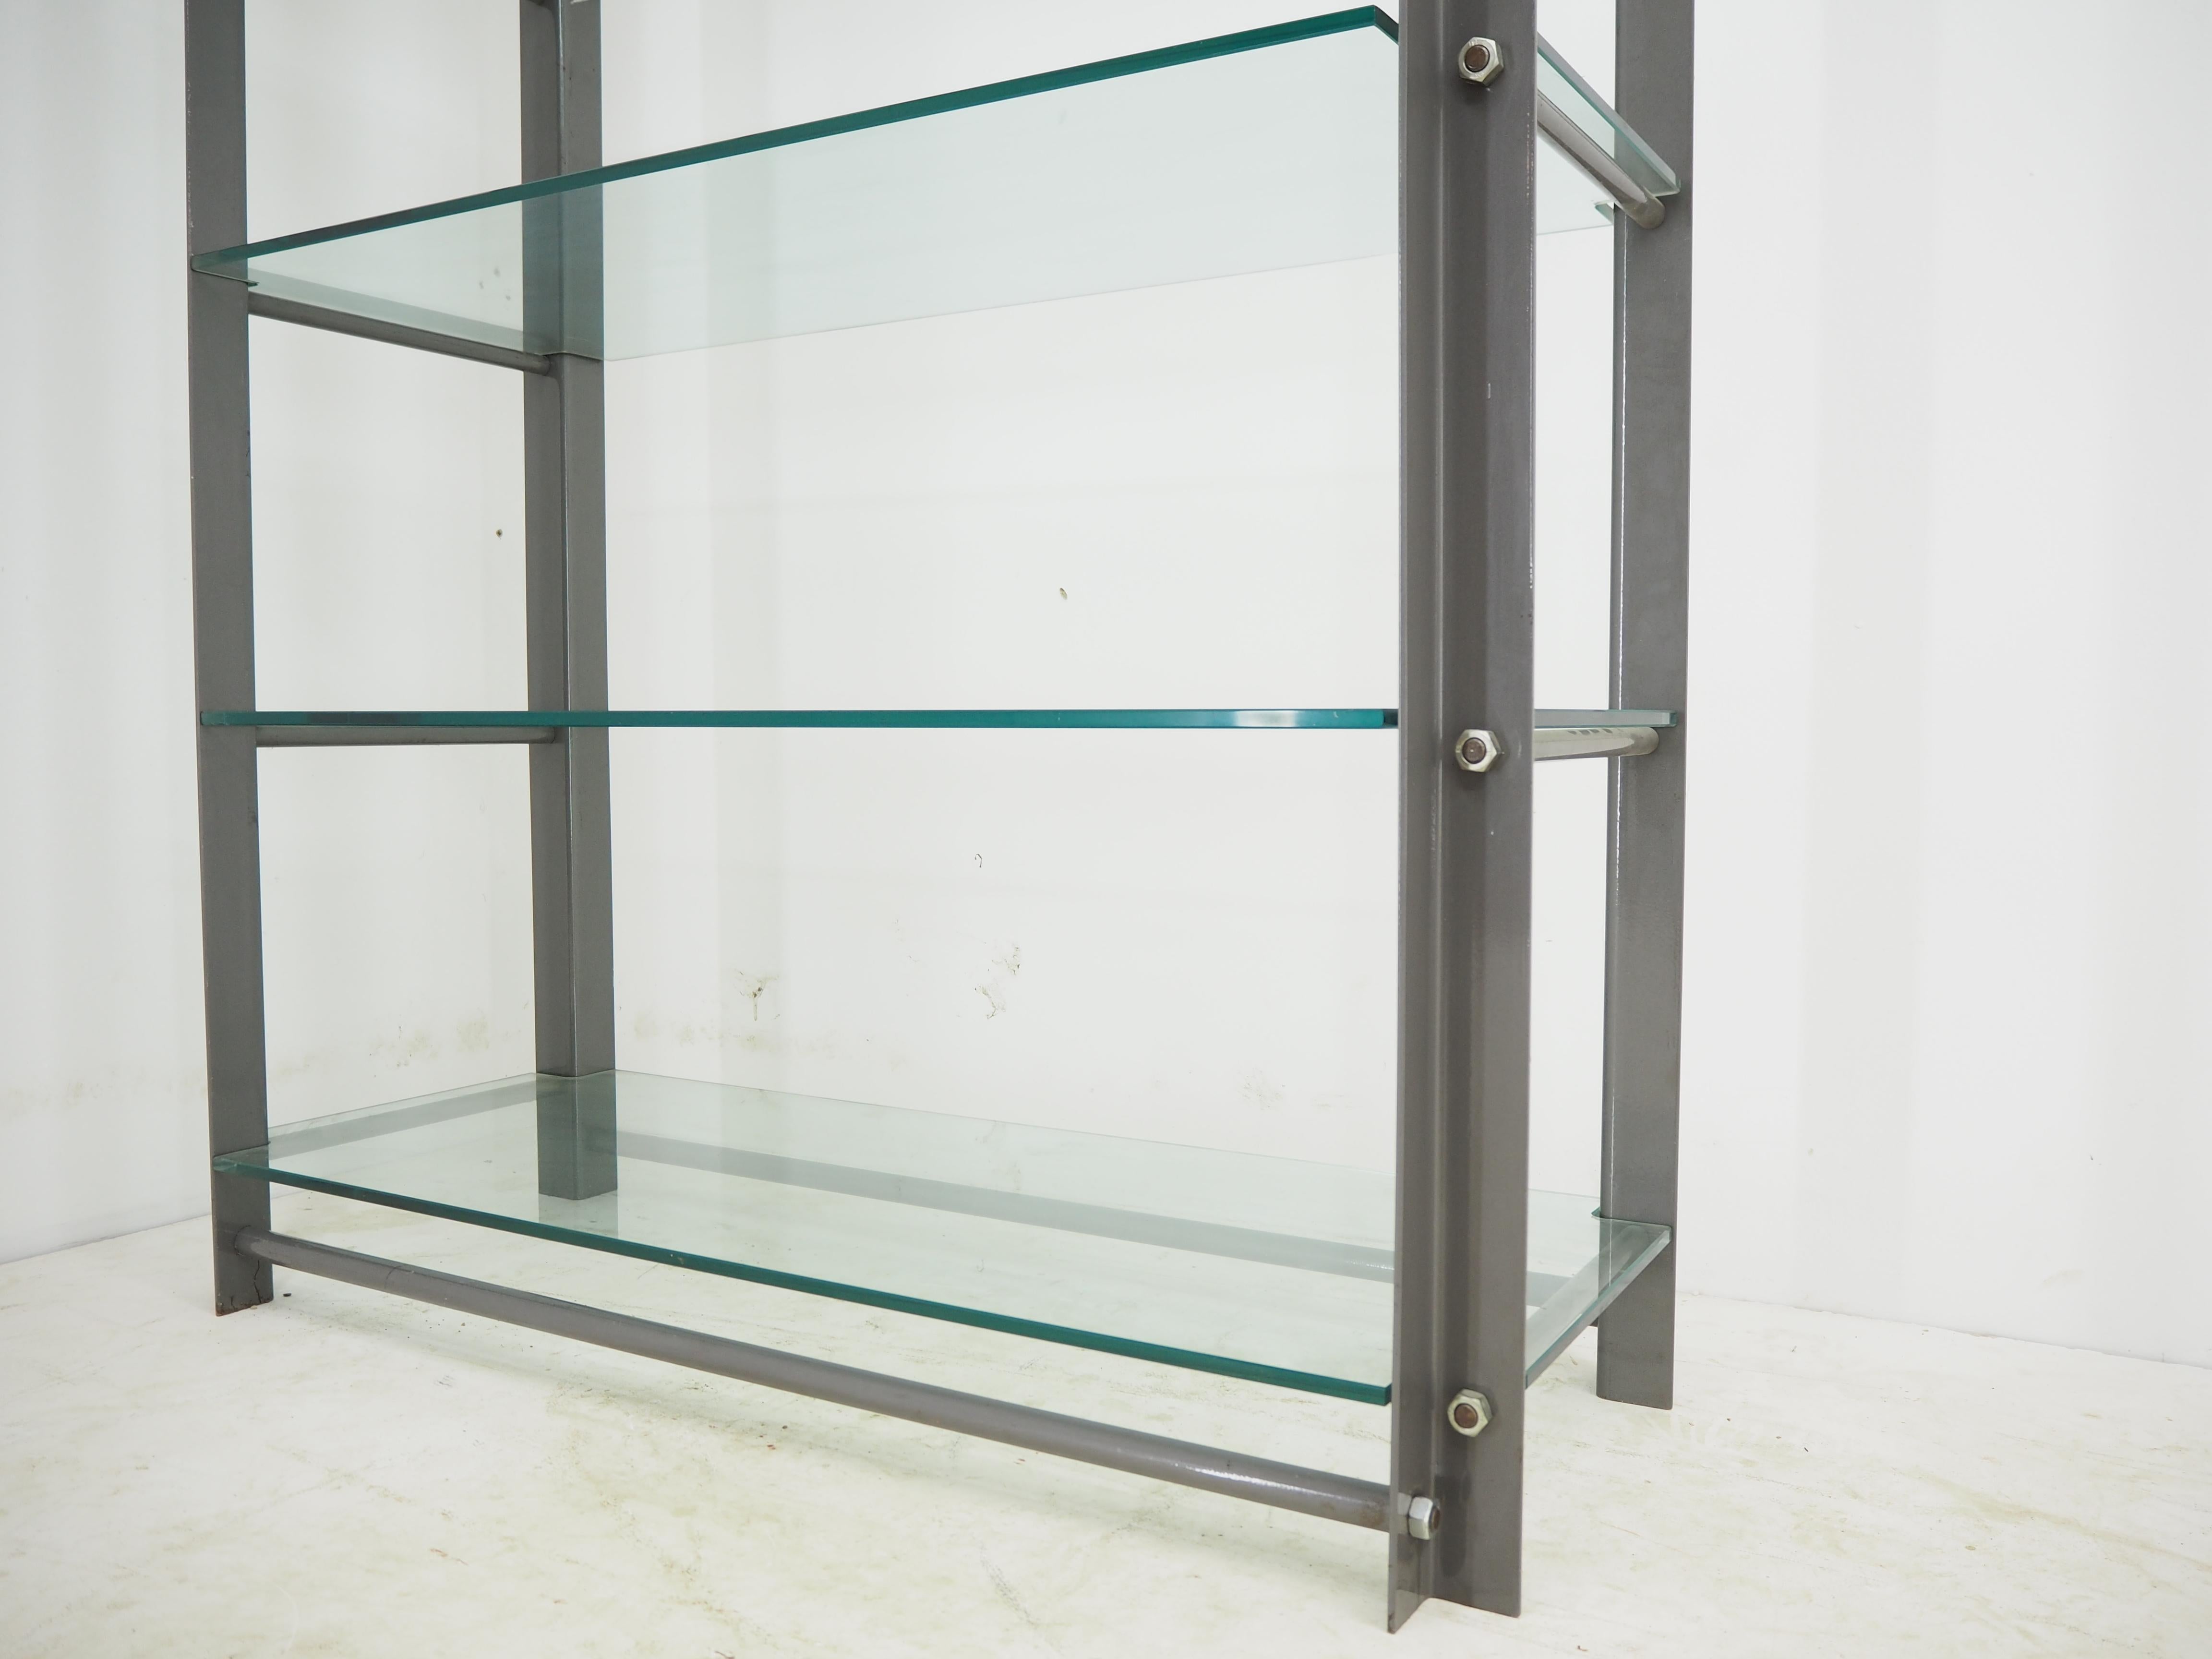 European Industrial Shelves, Steel and Tempered Glass, 2000s For Sale